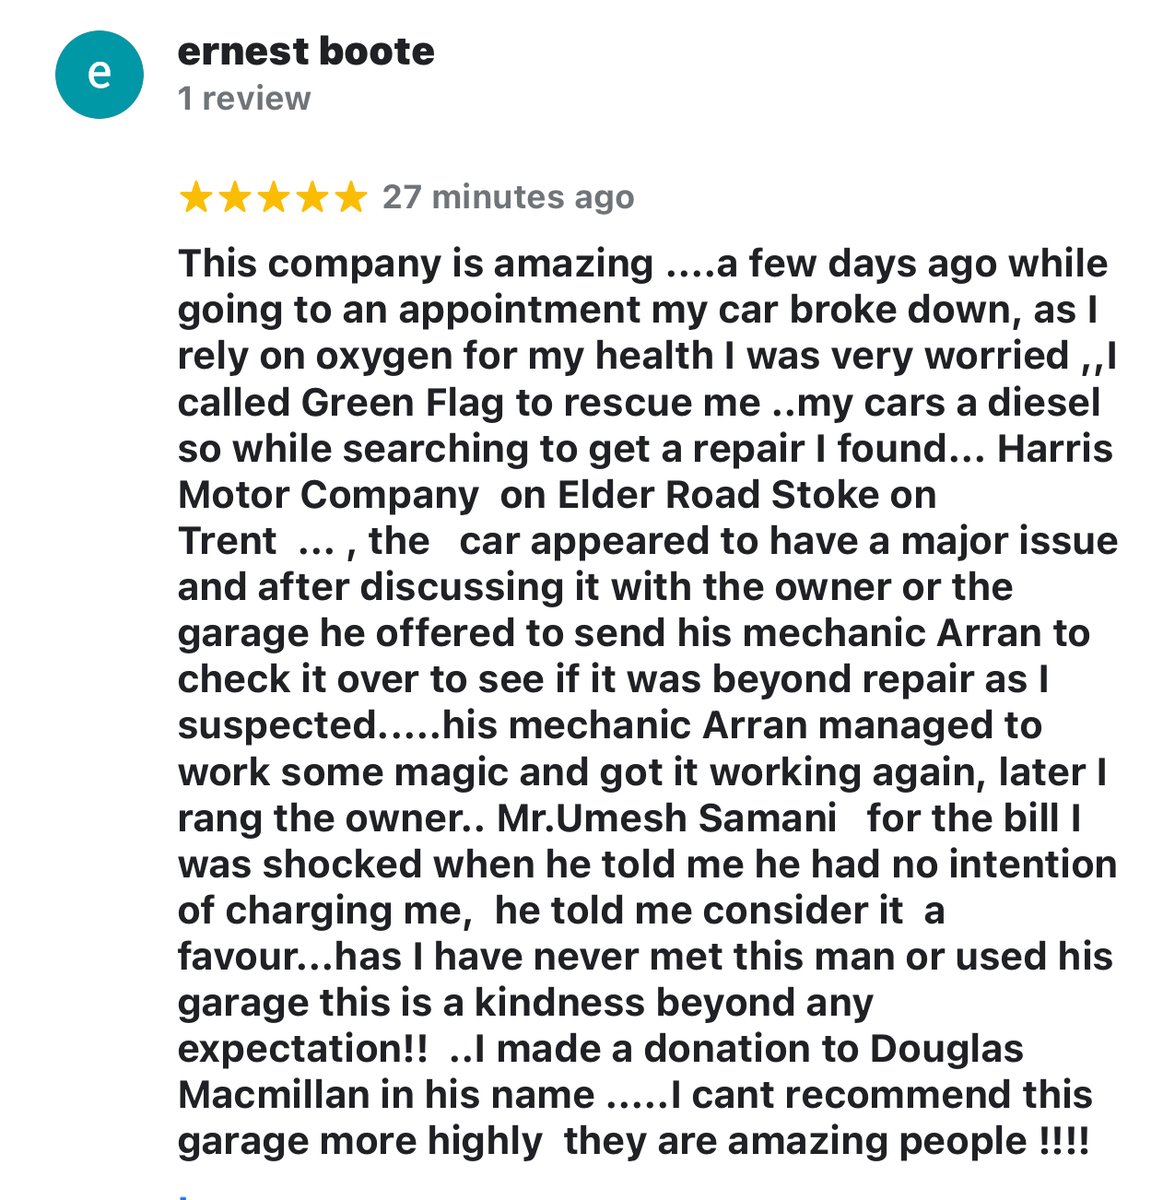 Just happy to be able to help someone when help is needed. 

#stokeontrent #Harrismotors